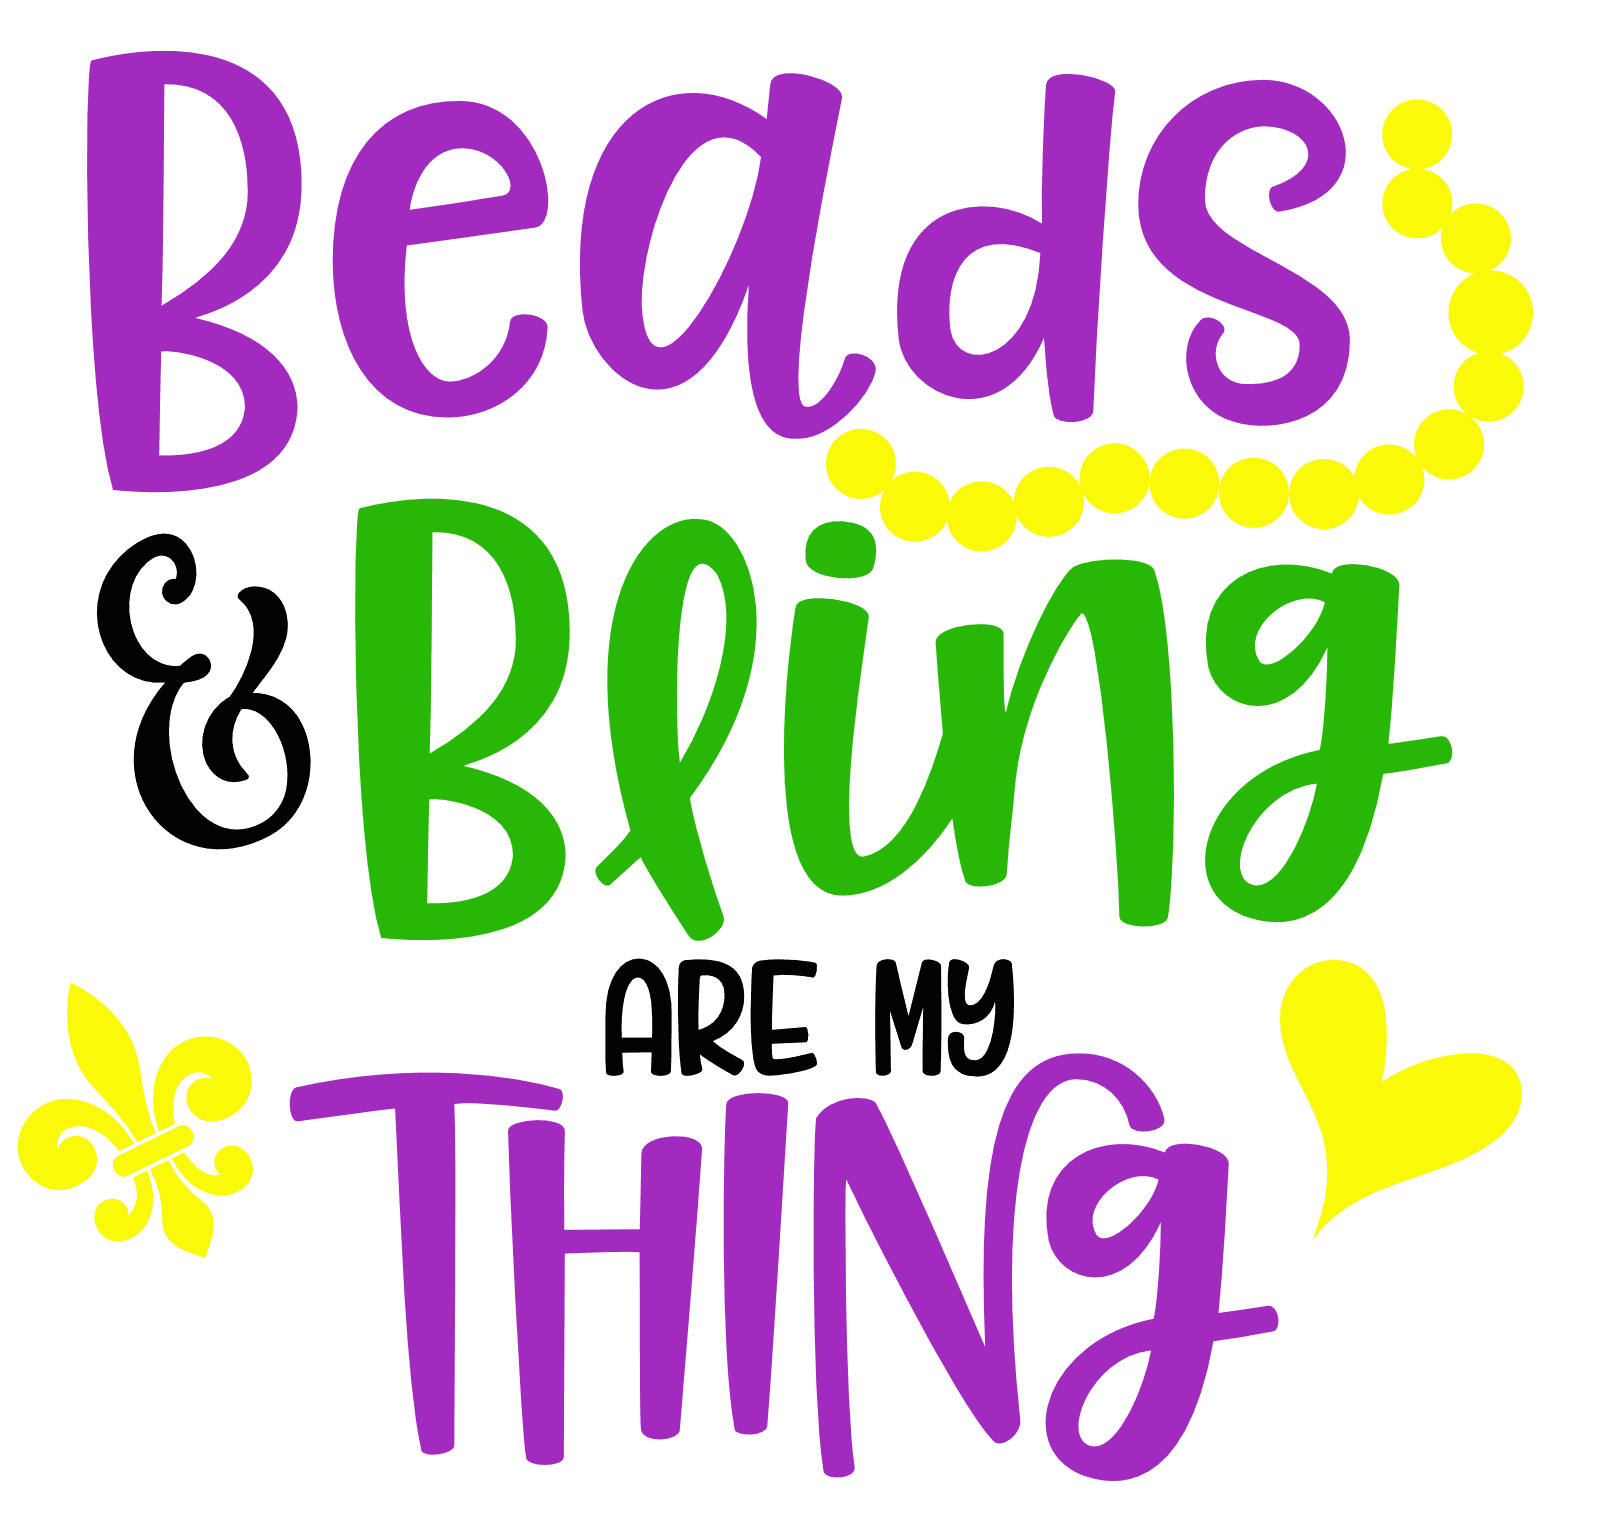 beads-and-bling-are-my-thing-fashion-free-svg-file-SvgHeart.Com